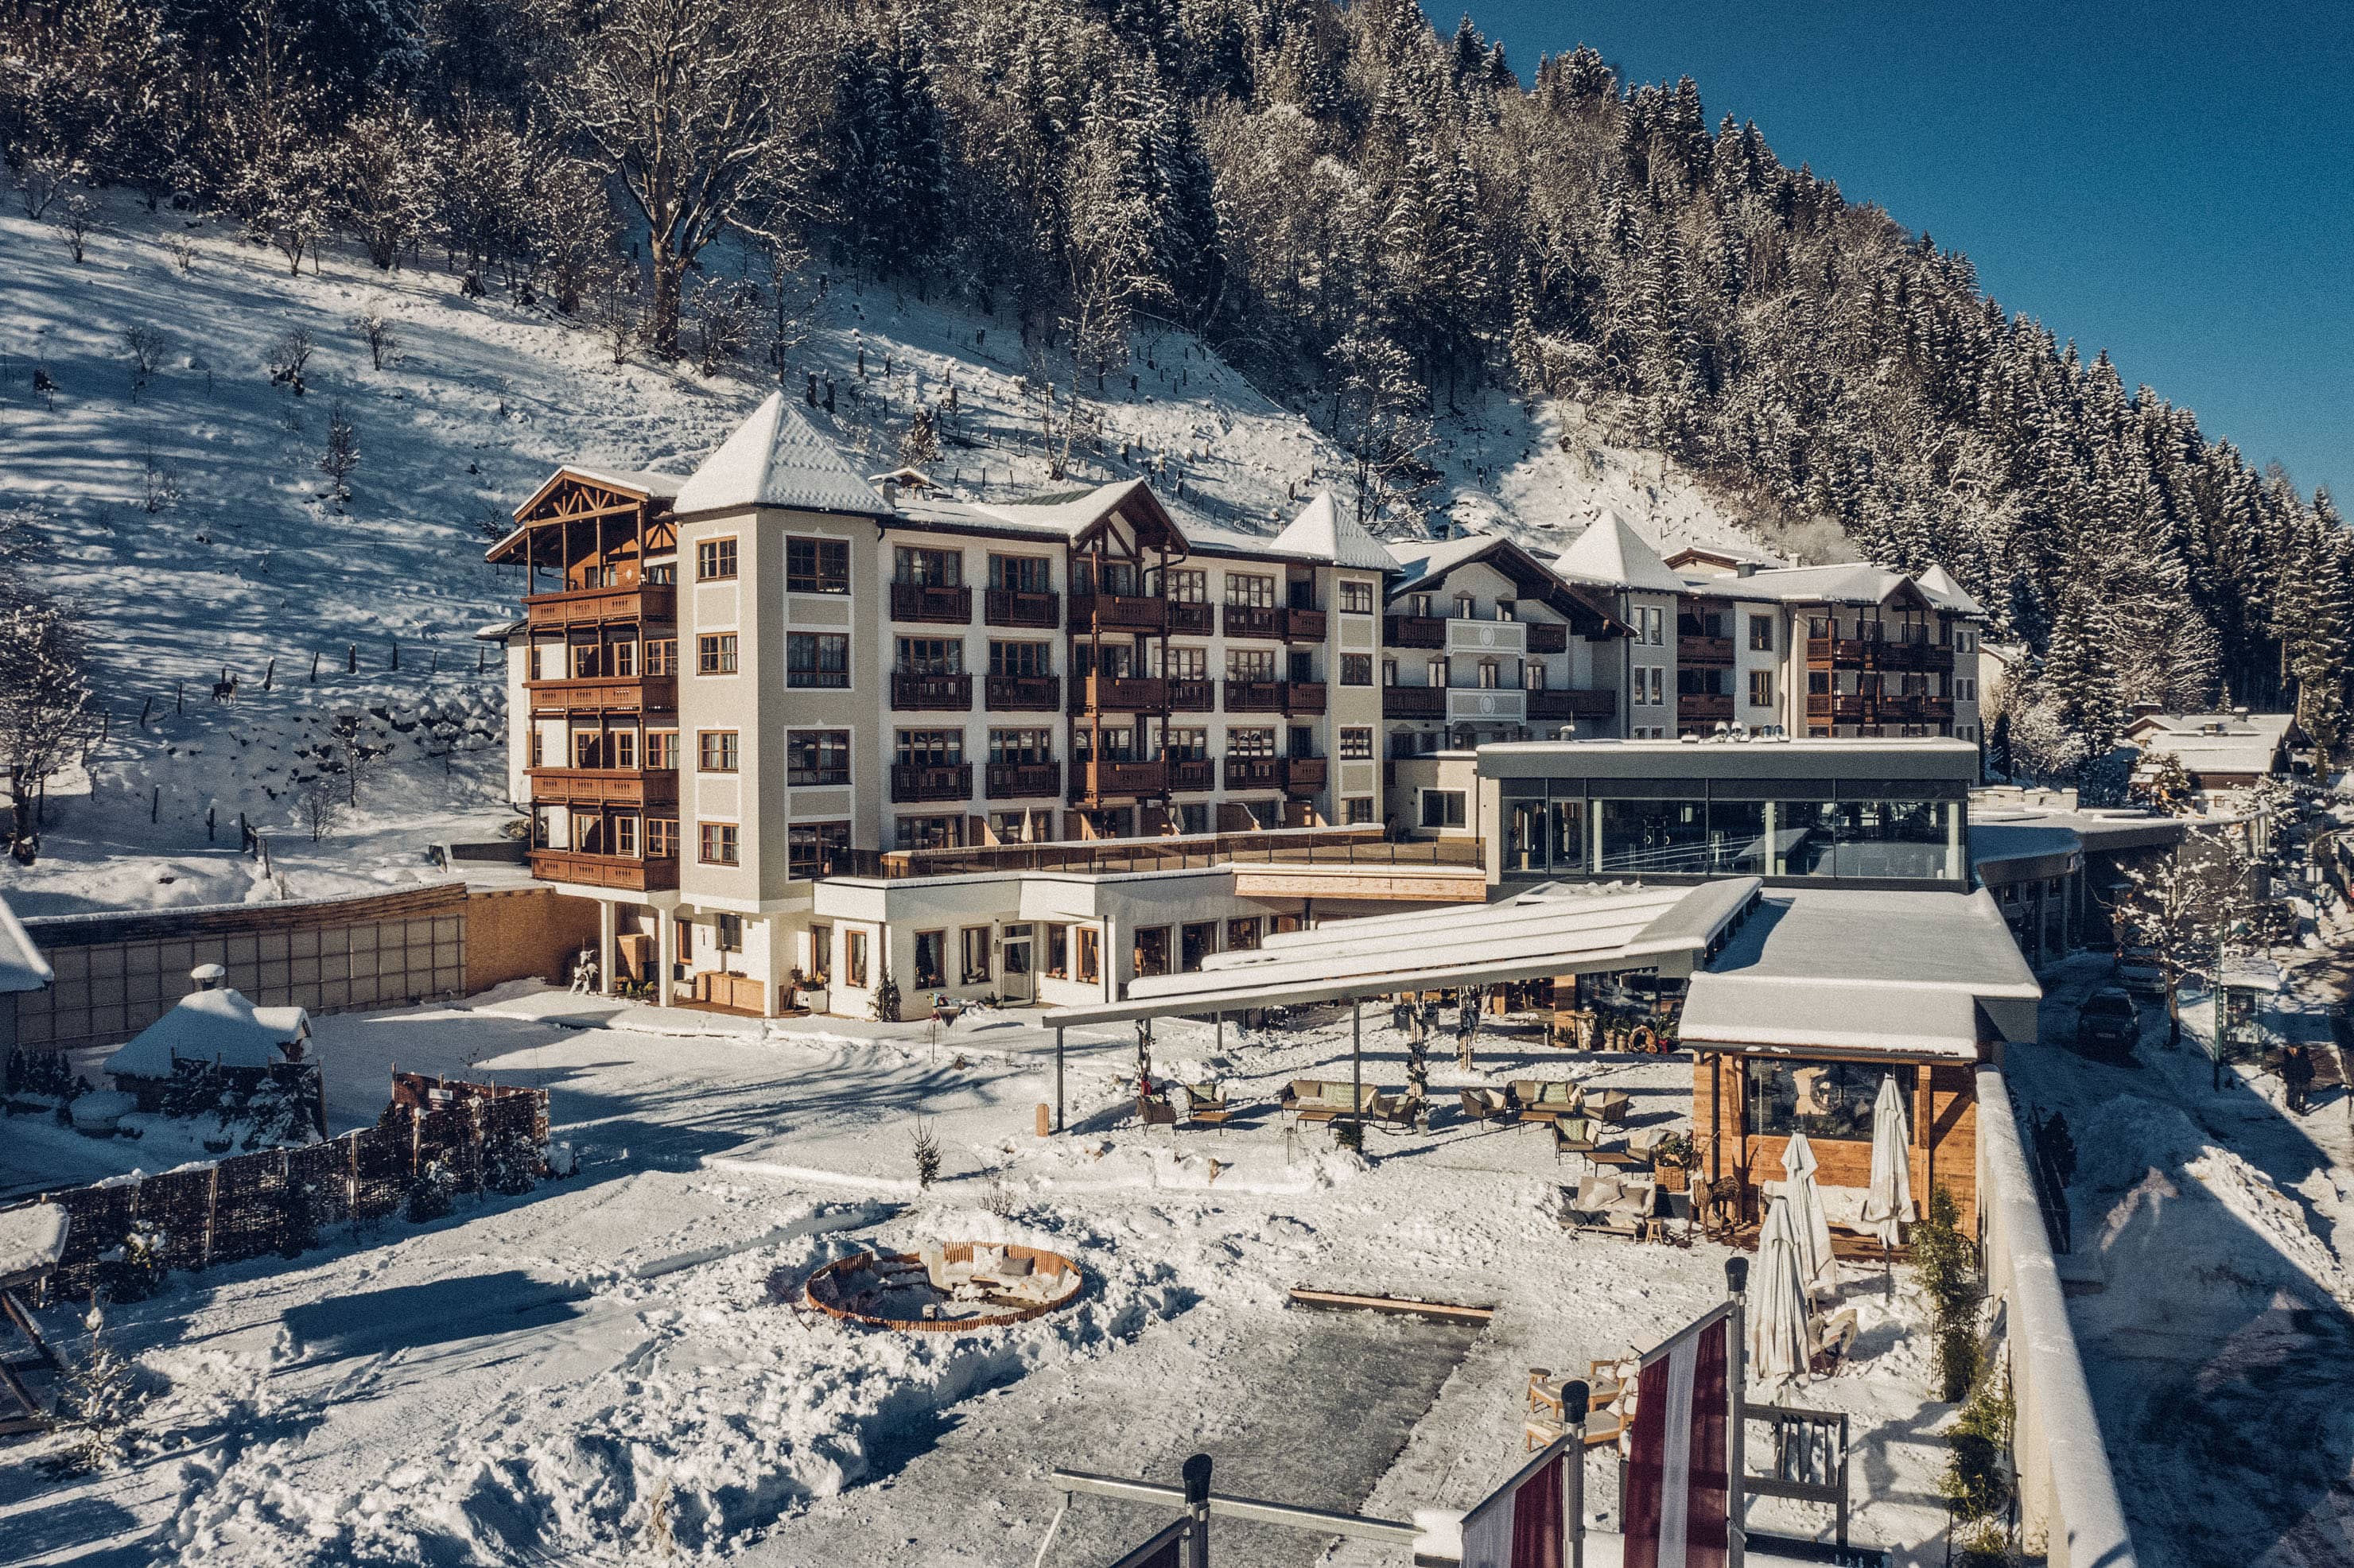 See ❤️ Hotel 4*S Empfehlung Zell ALPENBLICK, am 4*s 99% Hotel